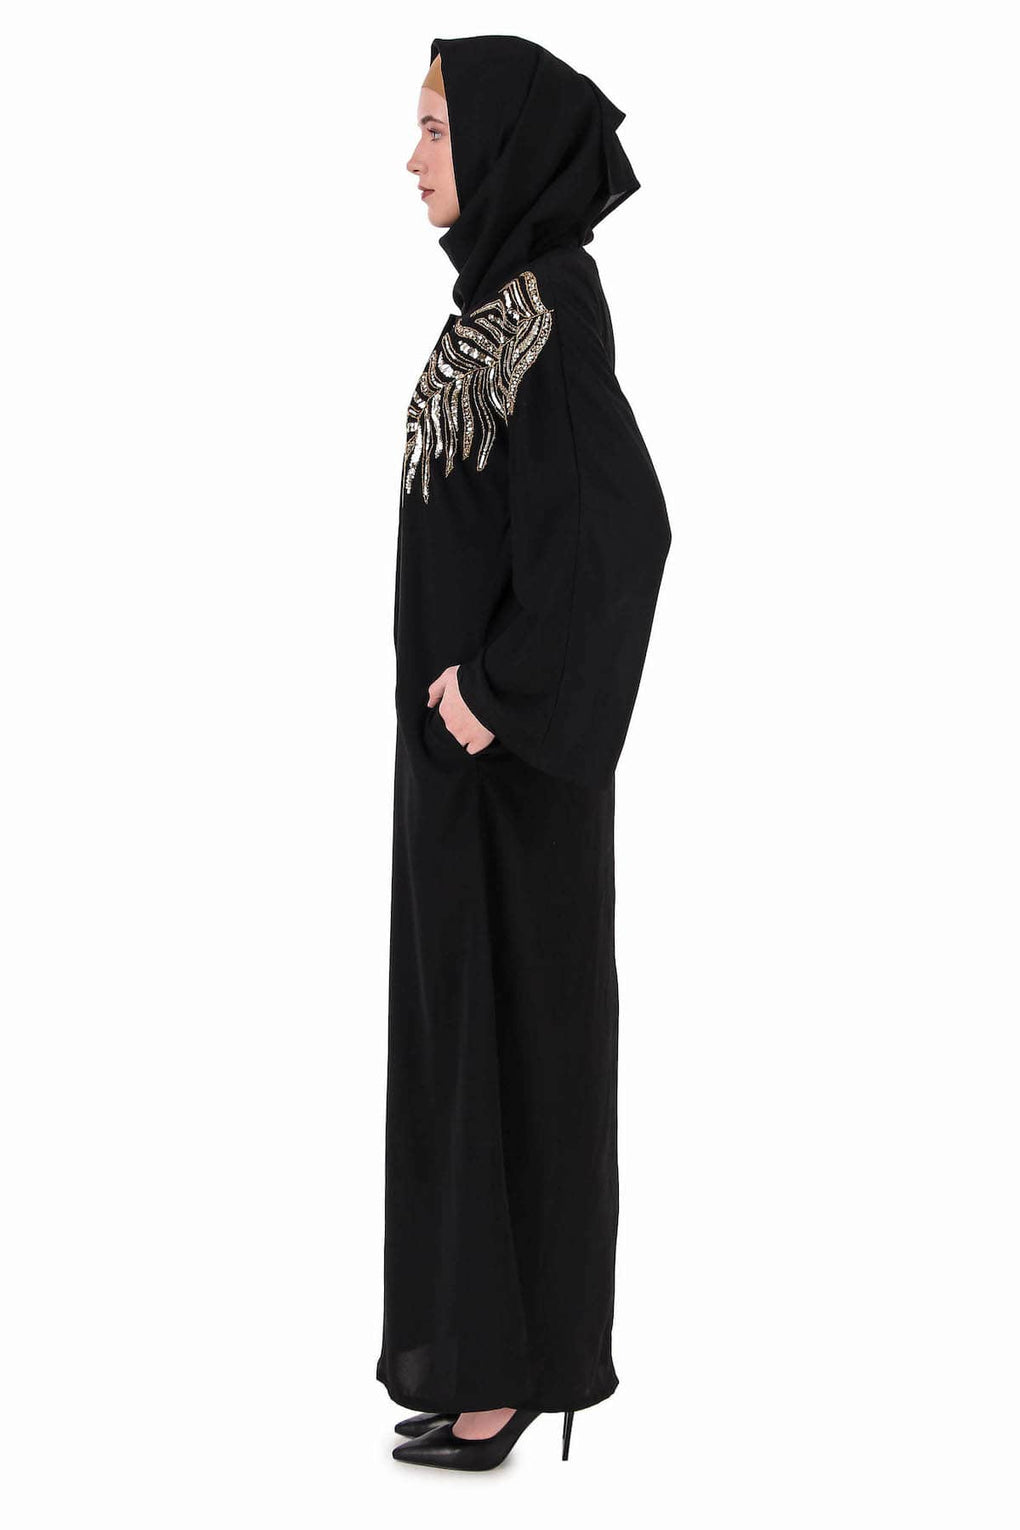 Front Open Hand Gold Leaf Embroidered Dubai Abaya